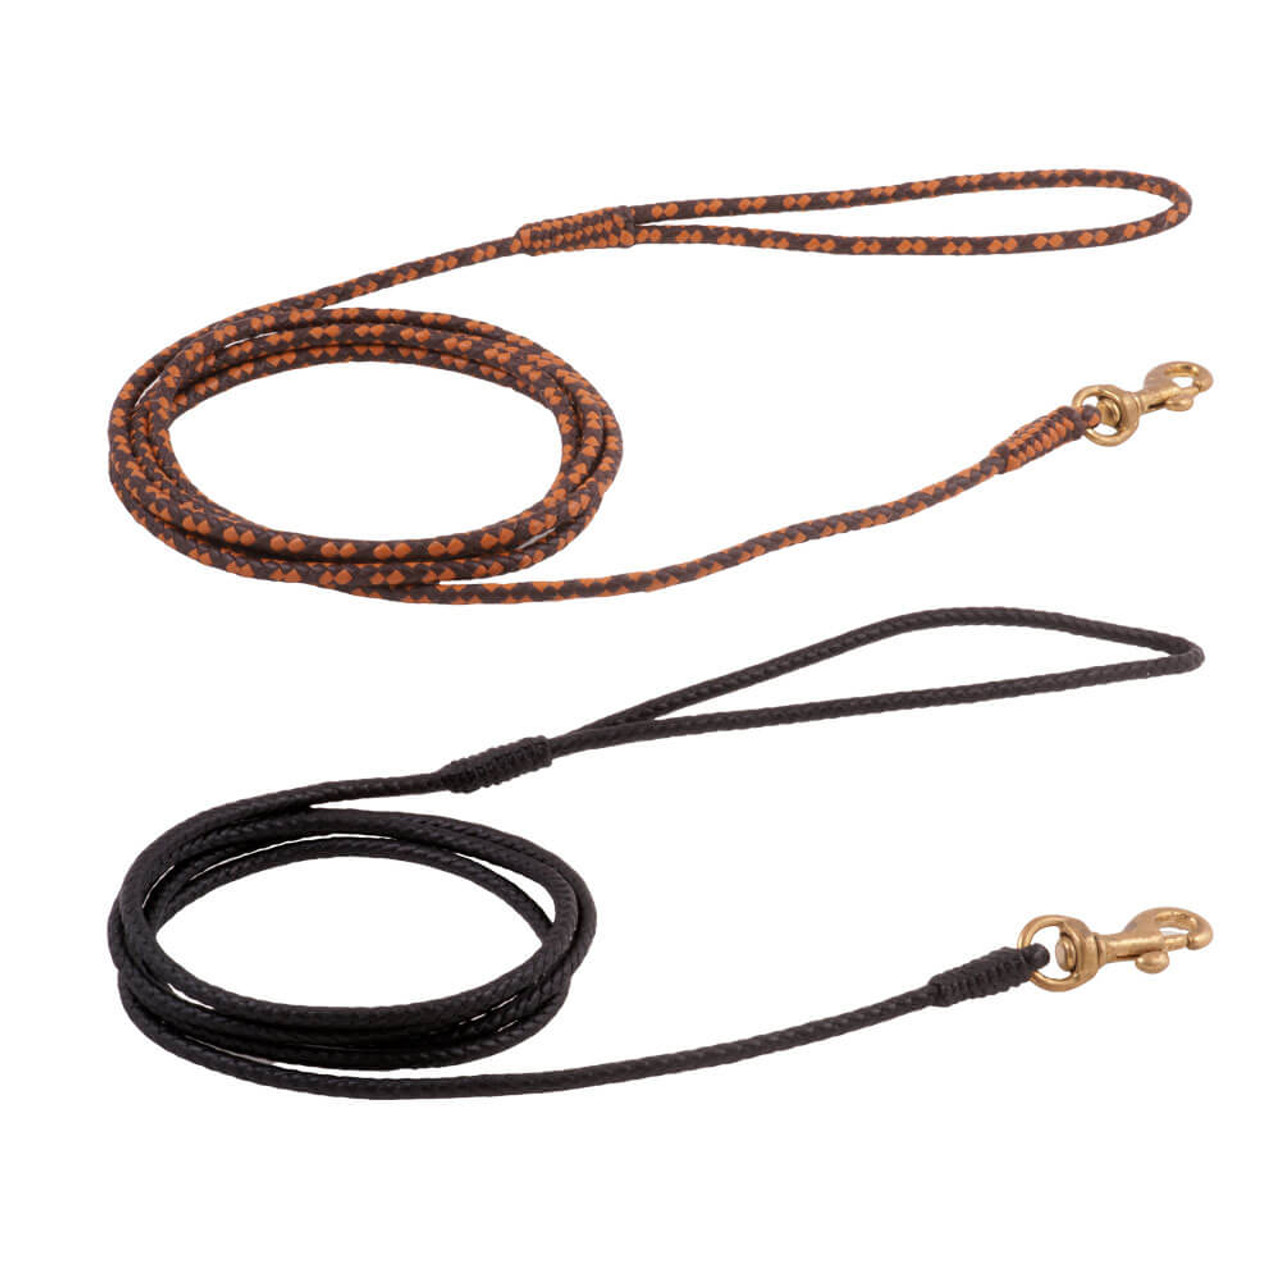 Alvalley Braided Leather Snap Lead